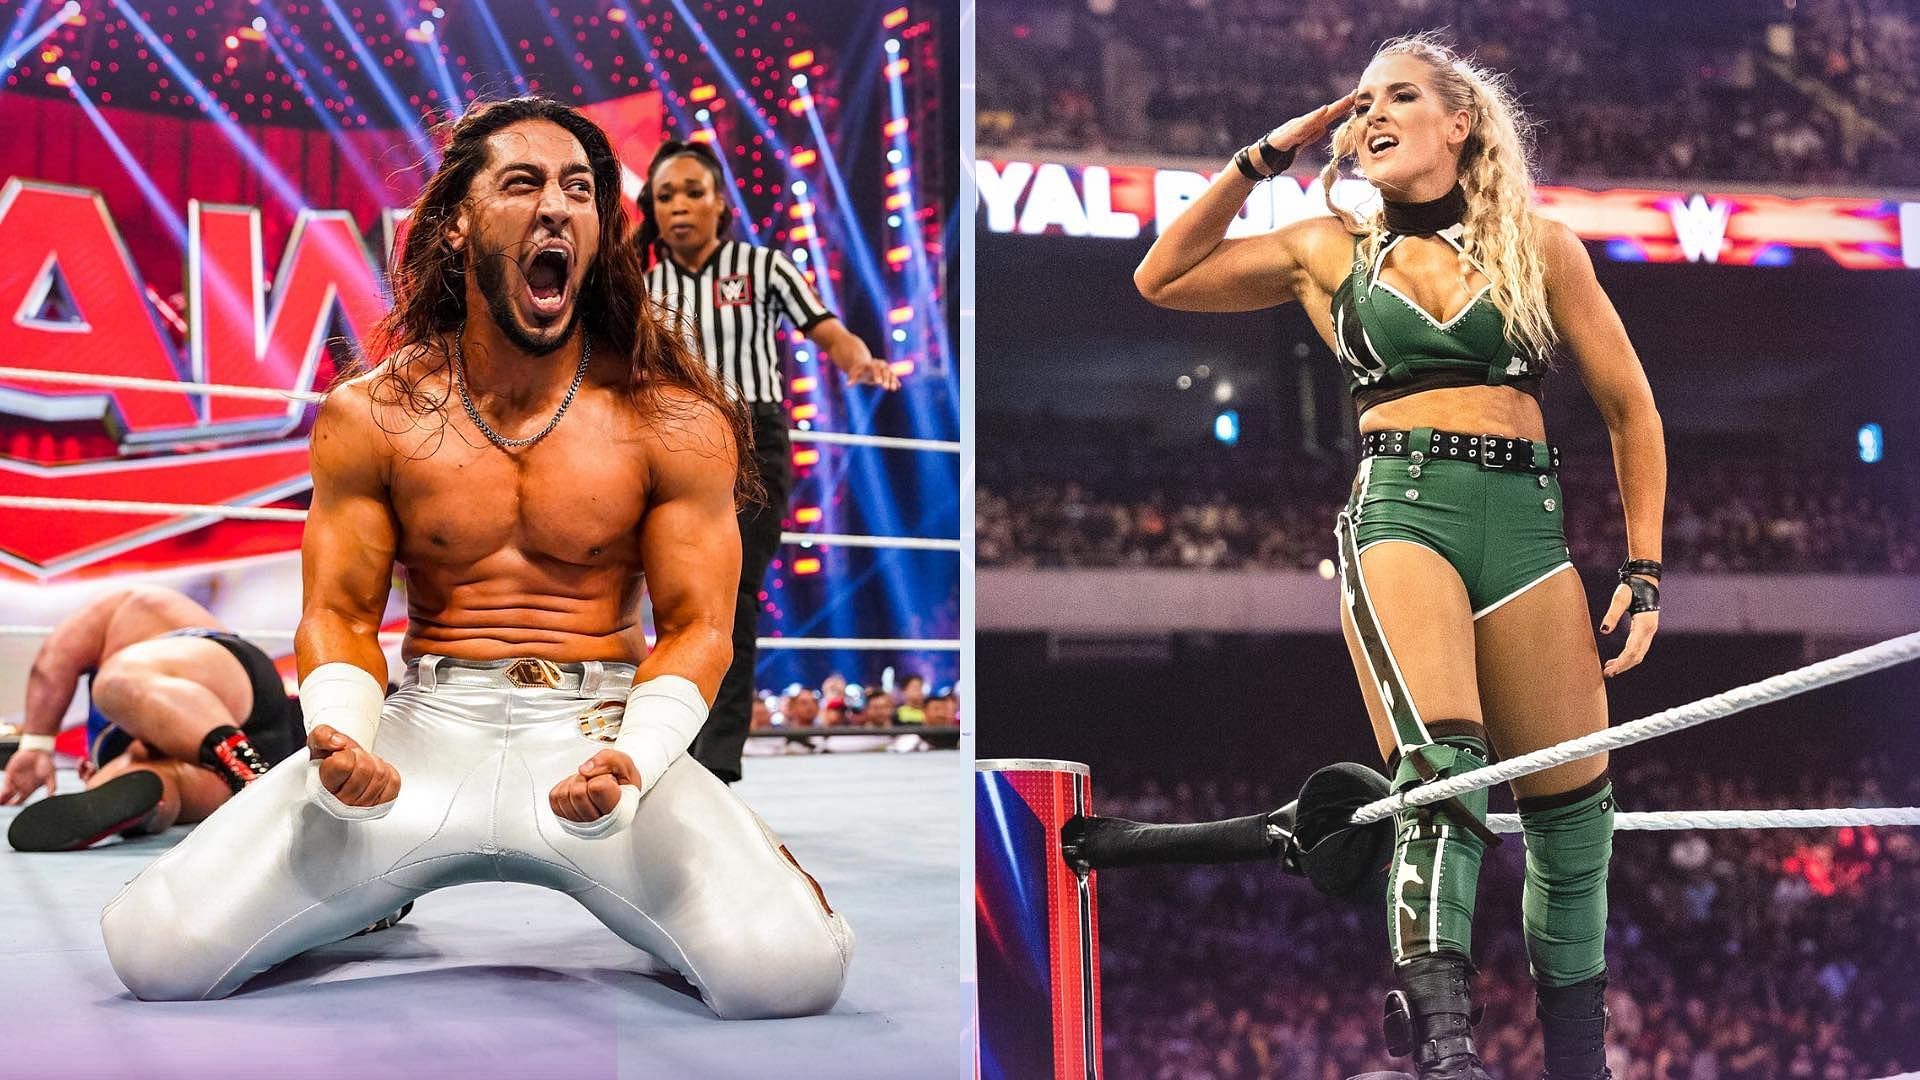 Some superstars are yet to win gold in WWE including Mustafa Ali